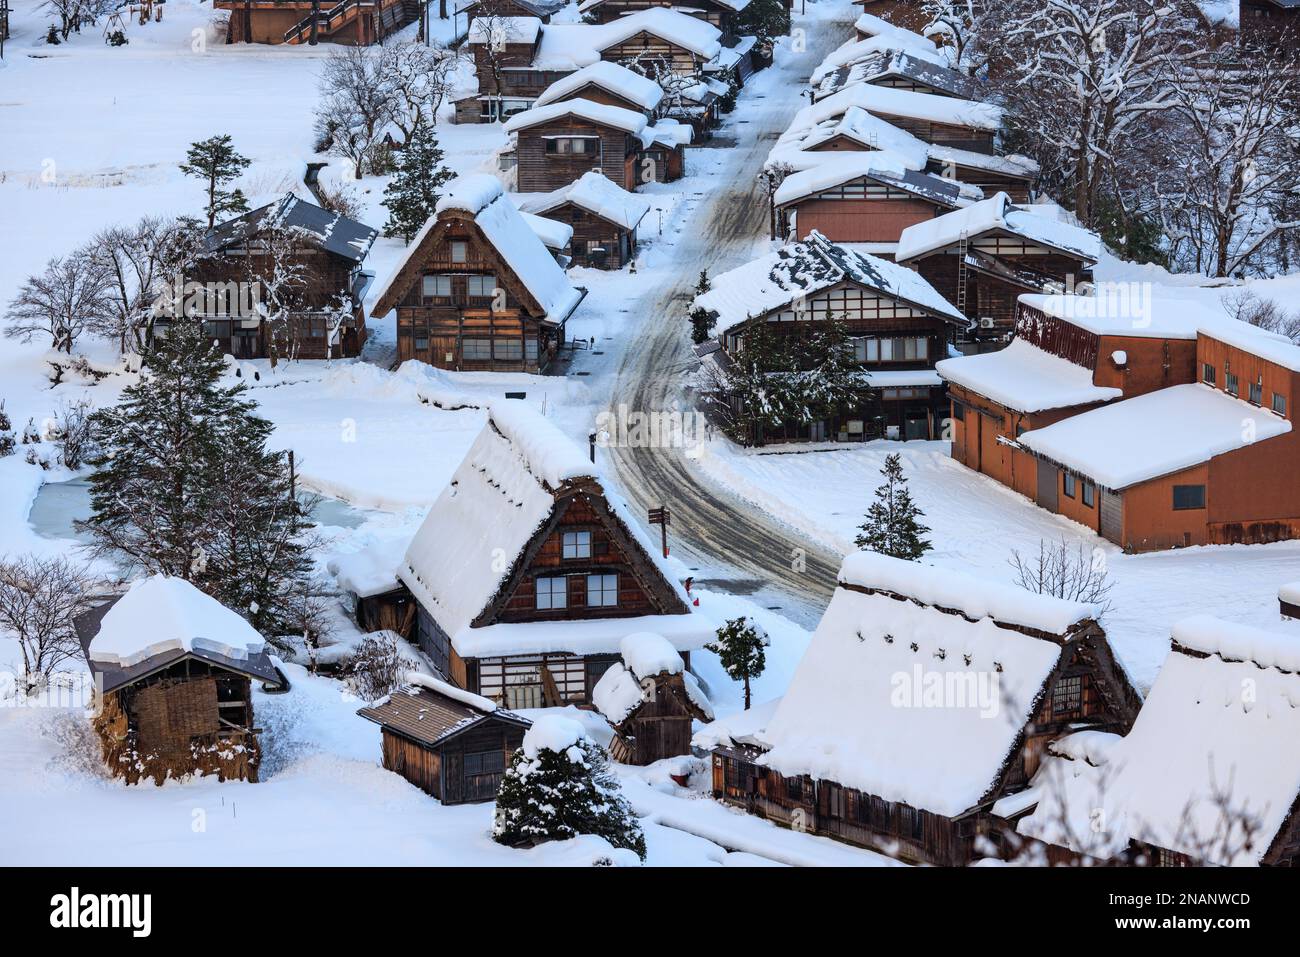 Snow covered A-frame roofs in historic Japanese mountain town in winter Stock Photo